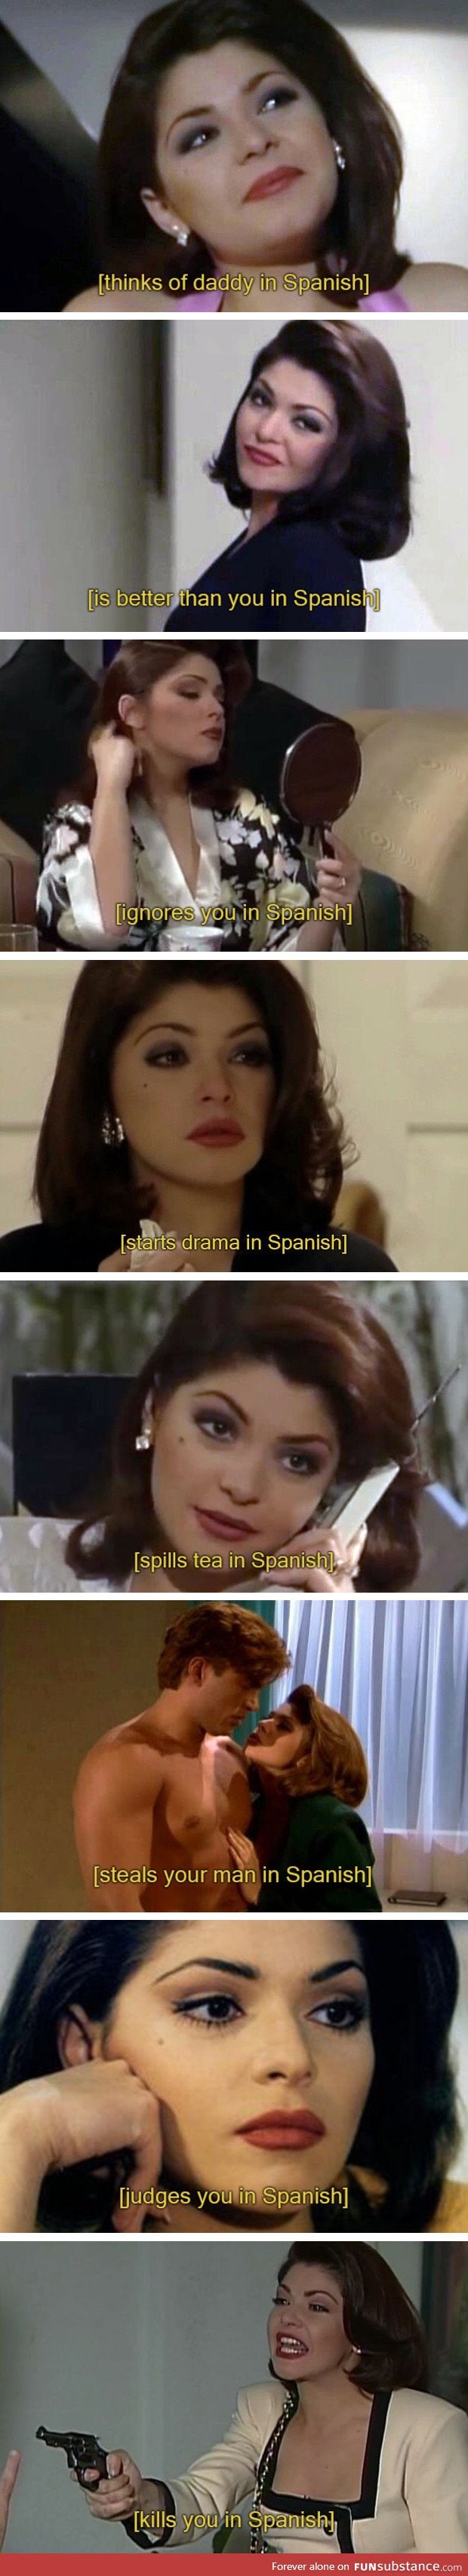 [Acts in Spanish]